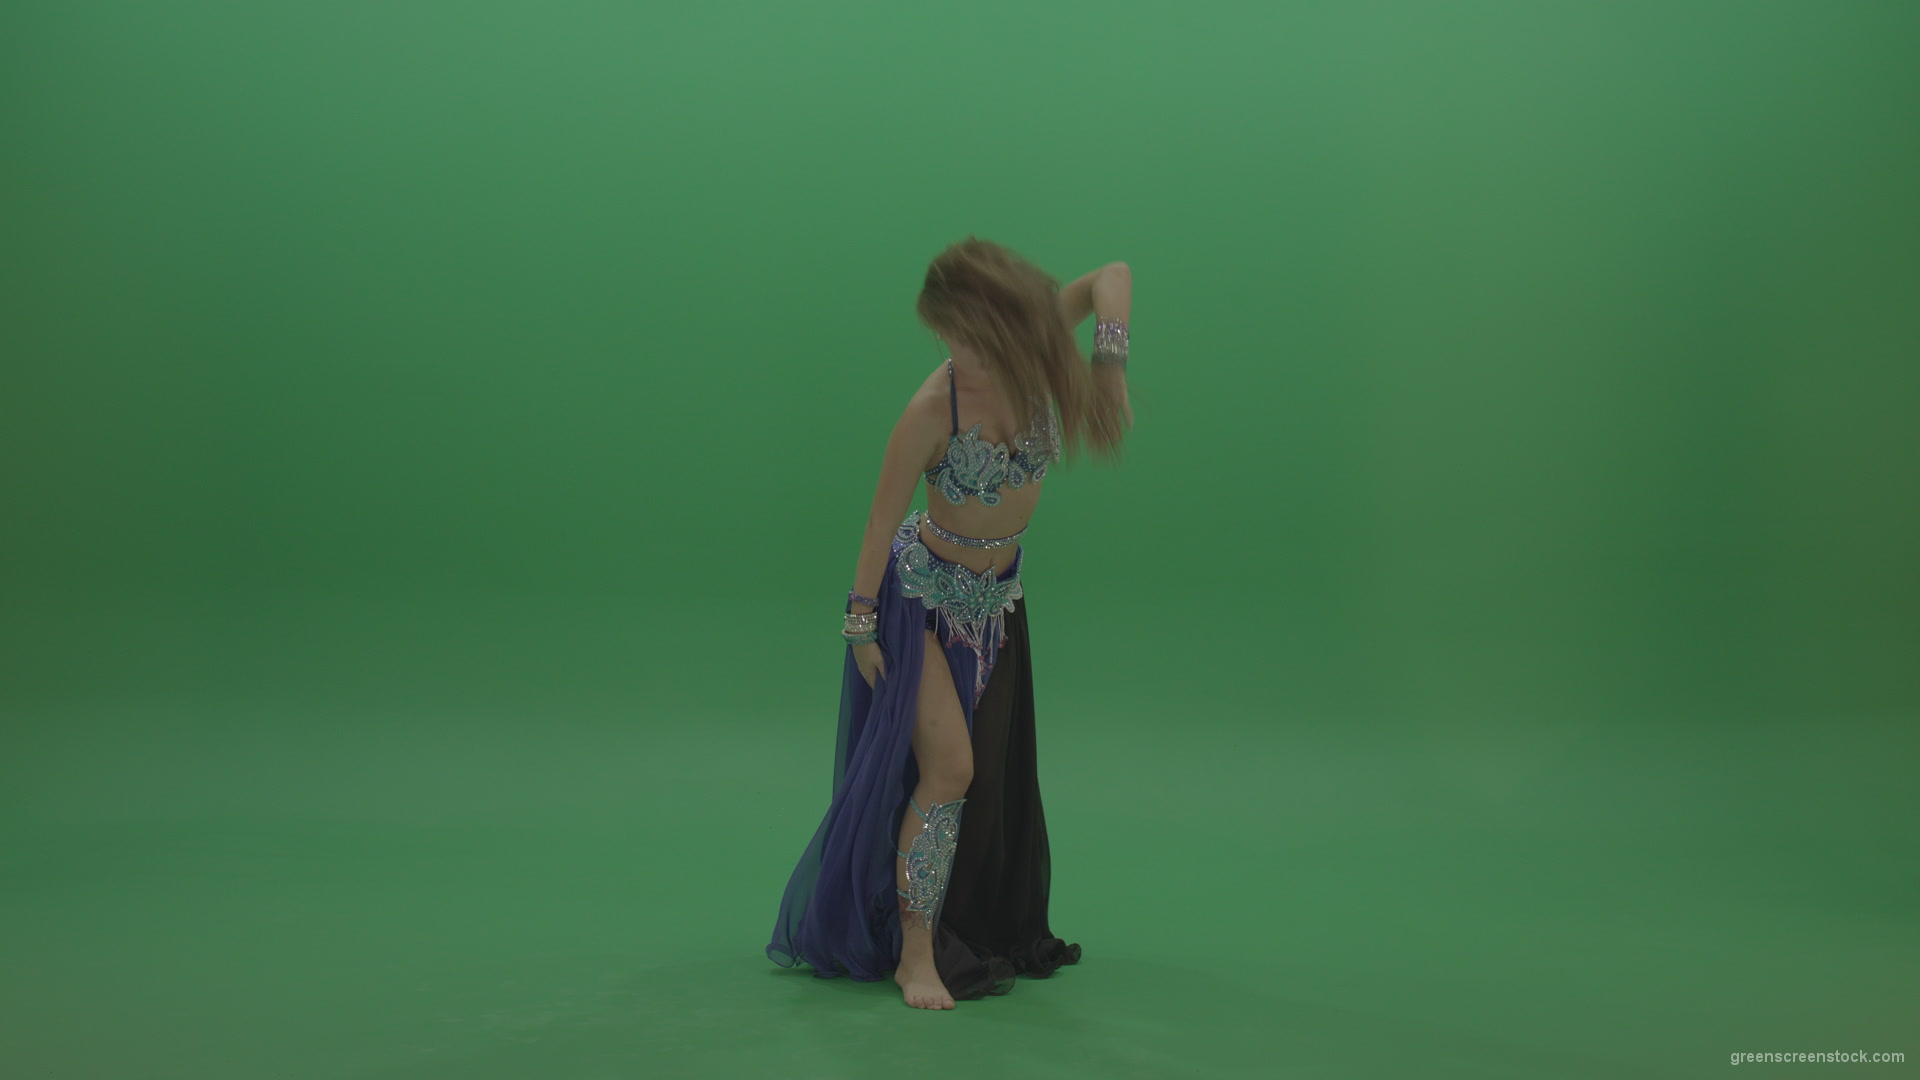 Foxy-belly-dancer-in-purple-and-black-wear-display-amazing-dance-moves-over-chromakey-background_007 Green Screen Stock